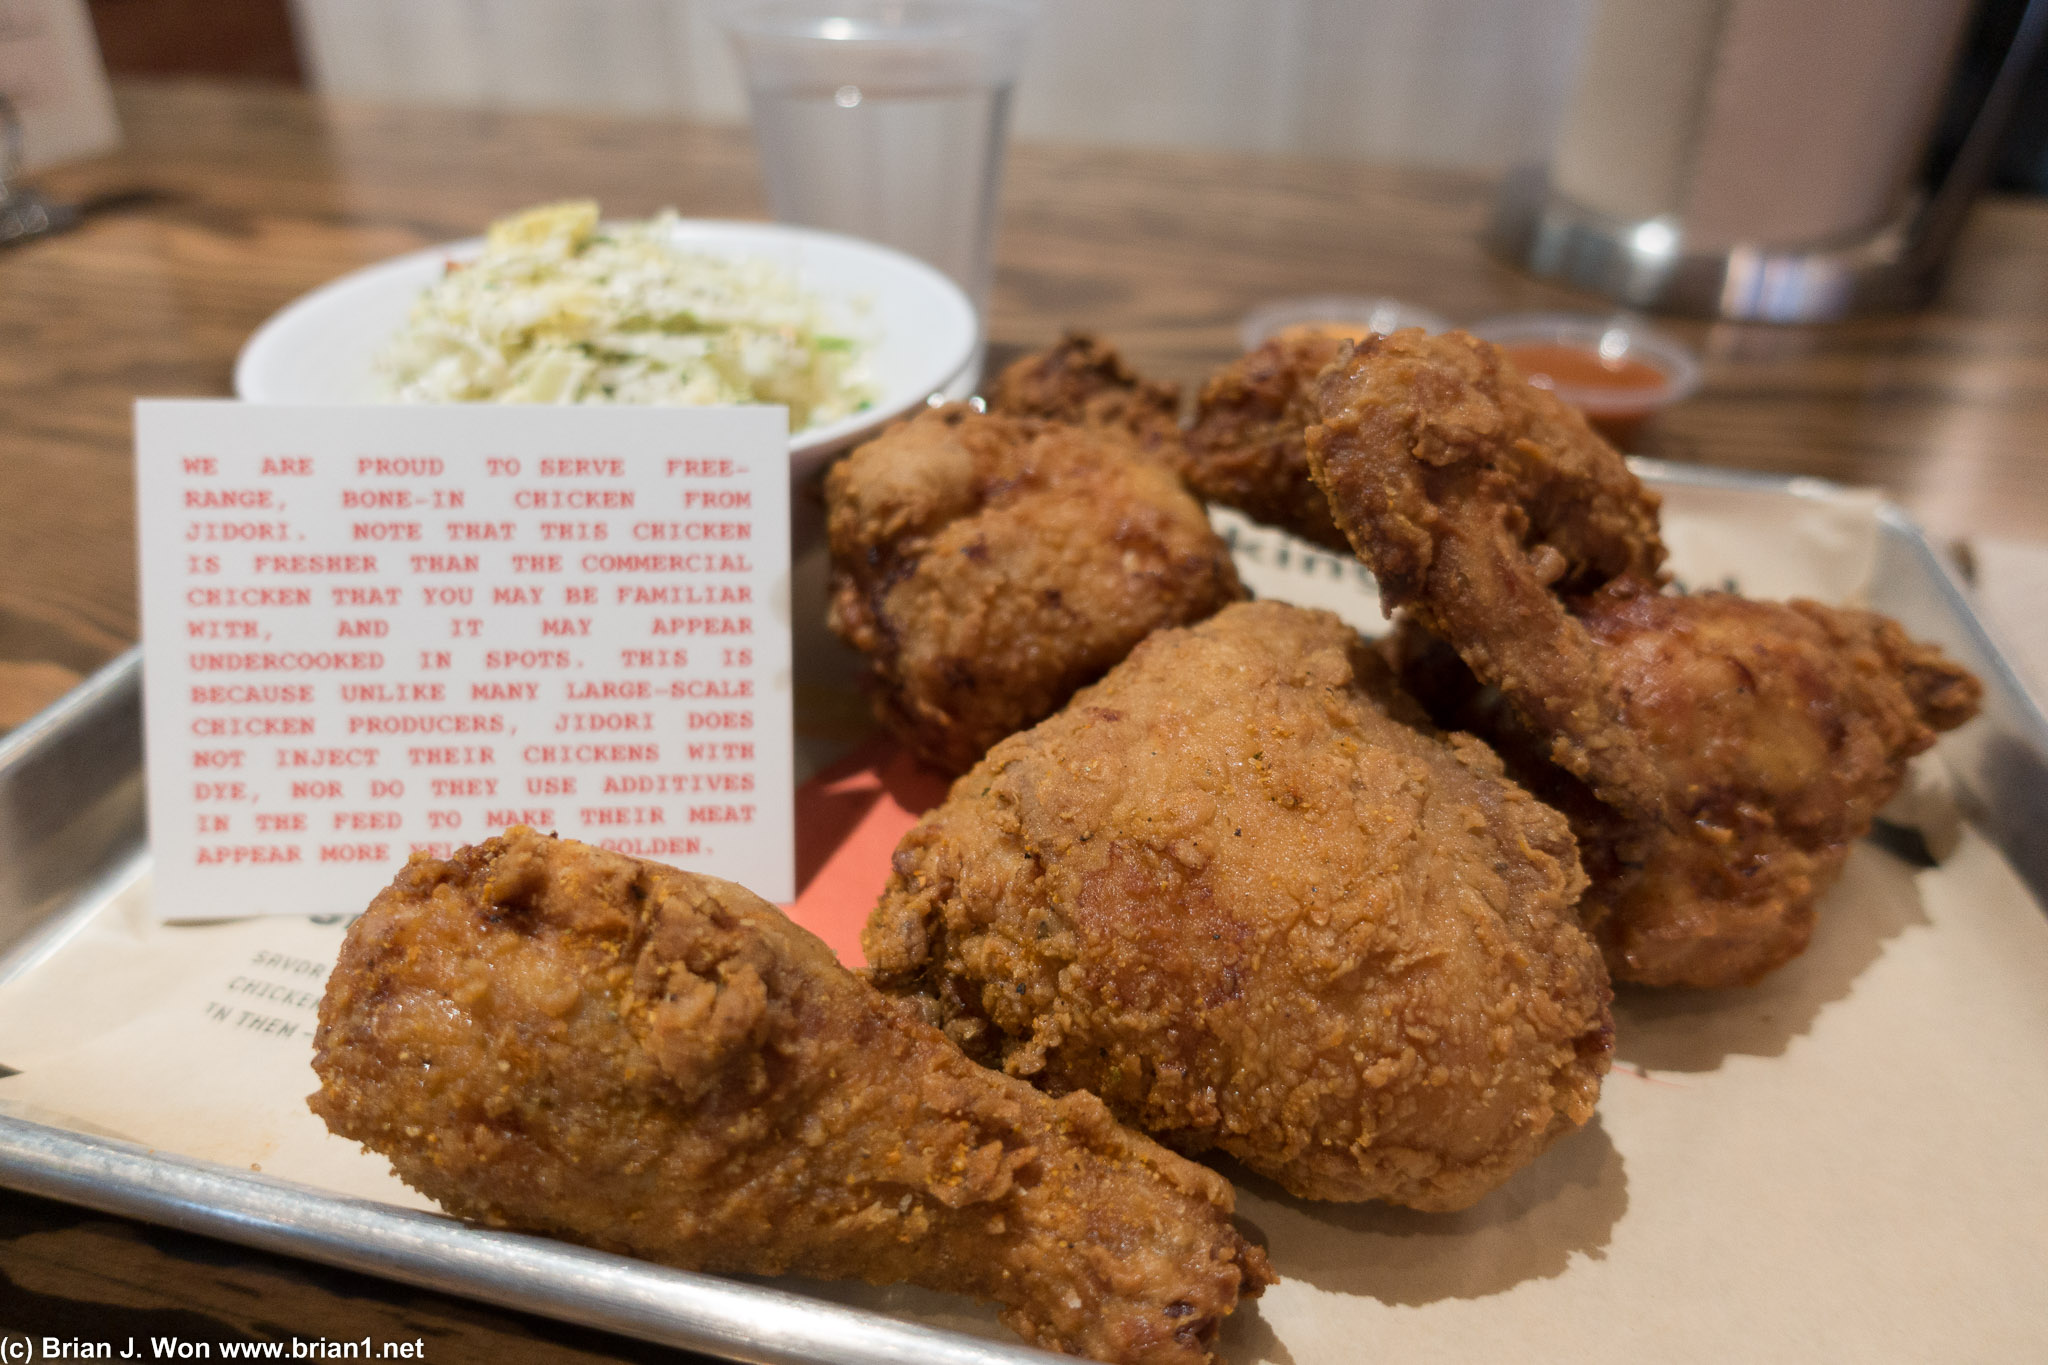 Fried chicken at The Crack Shack is damned good.